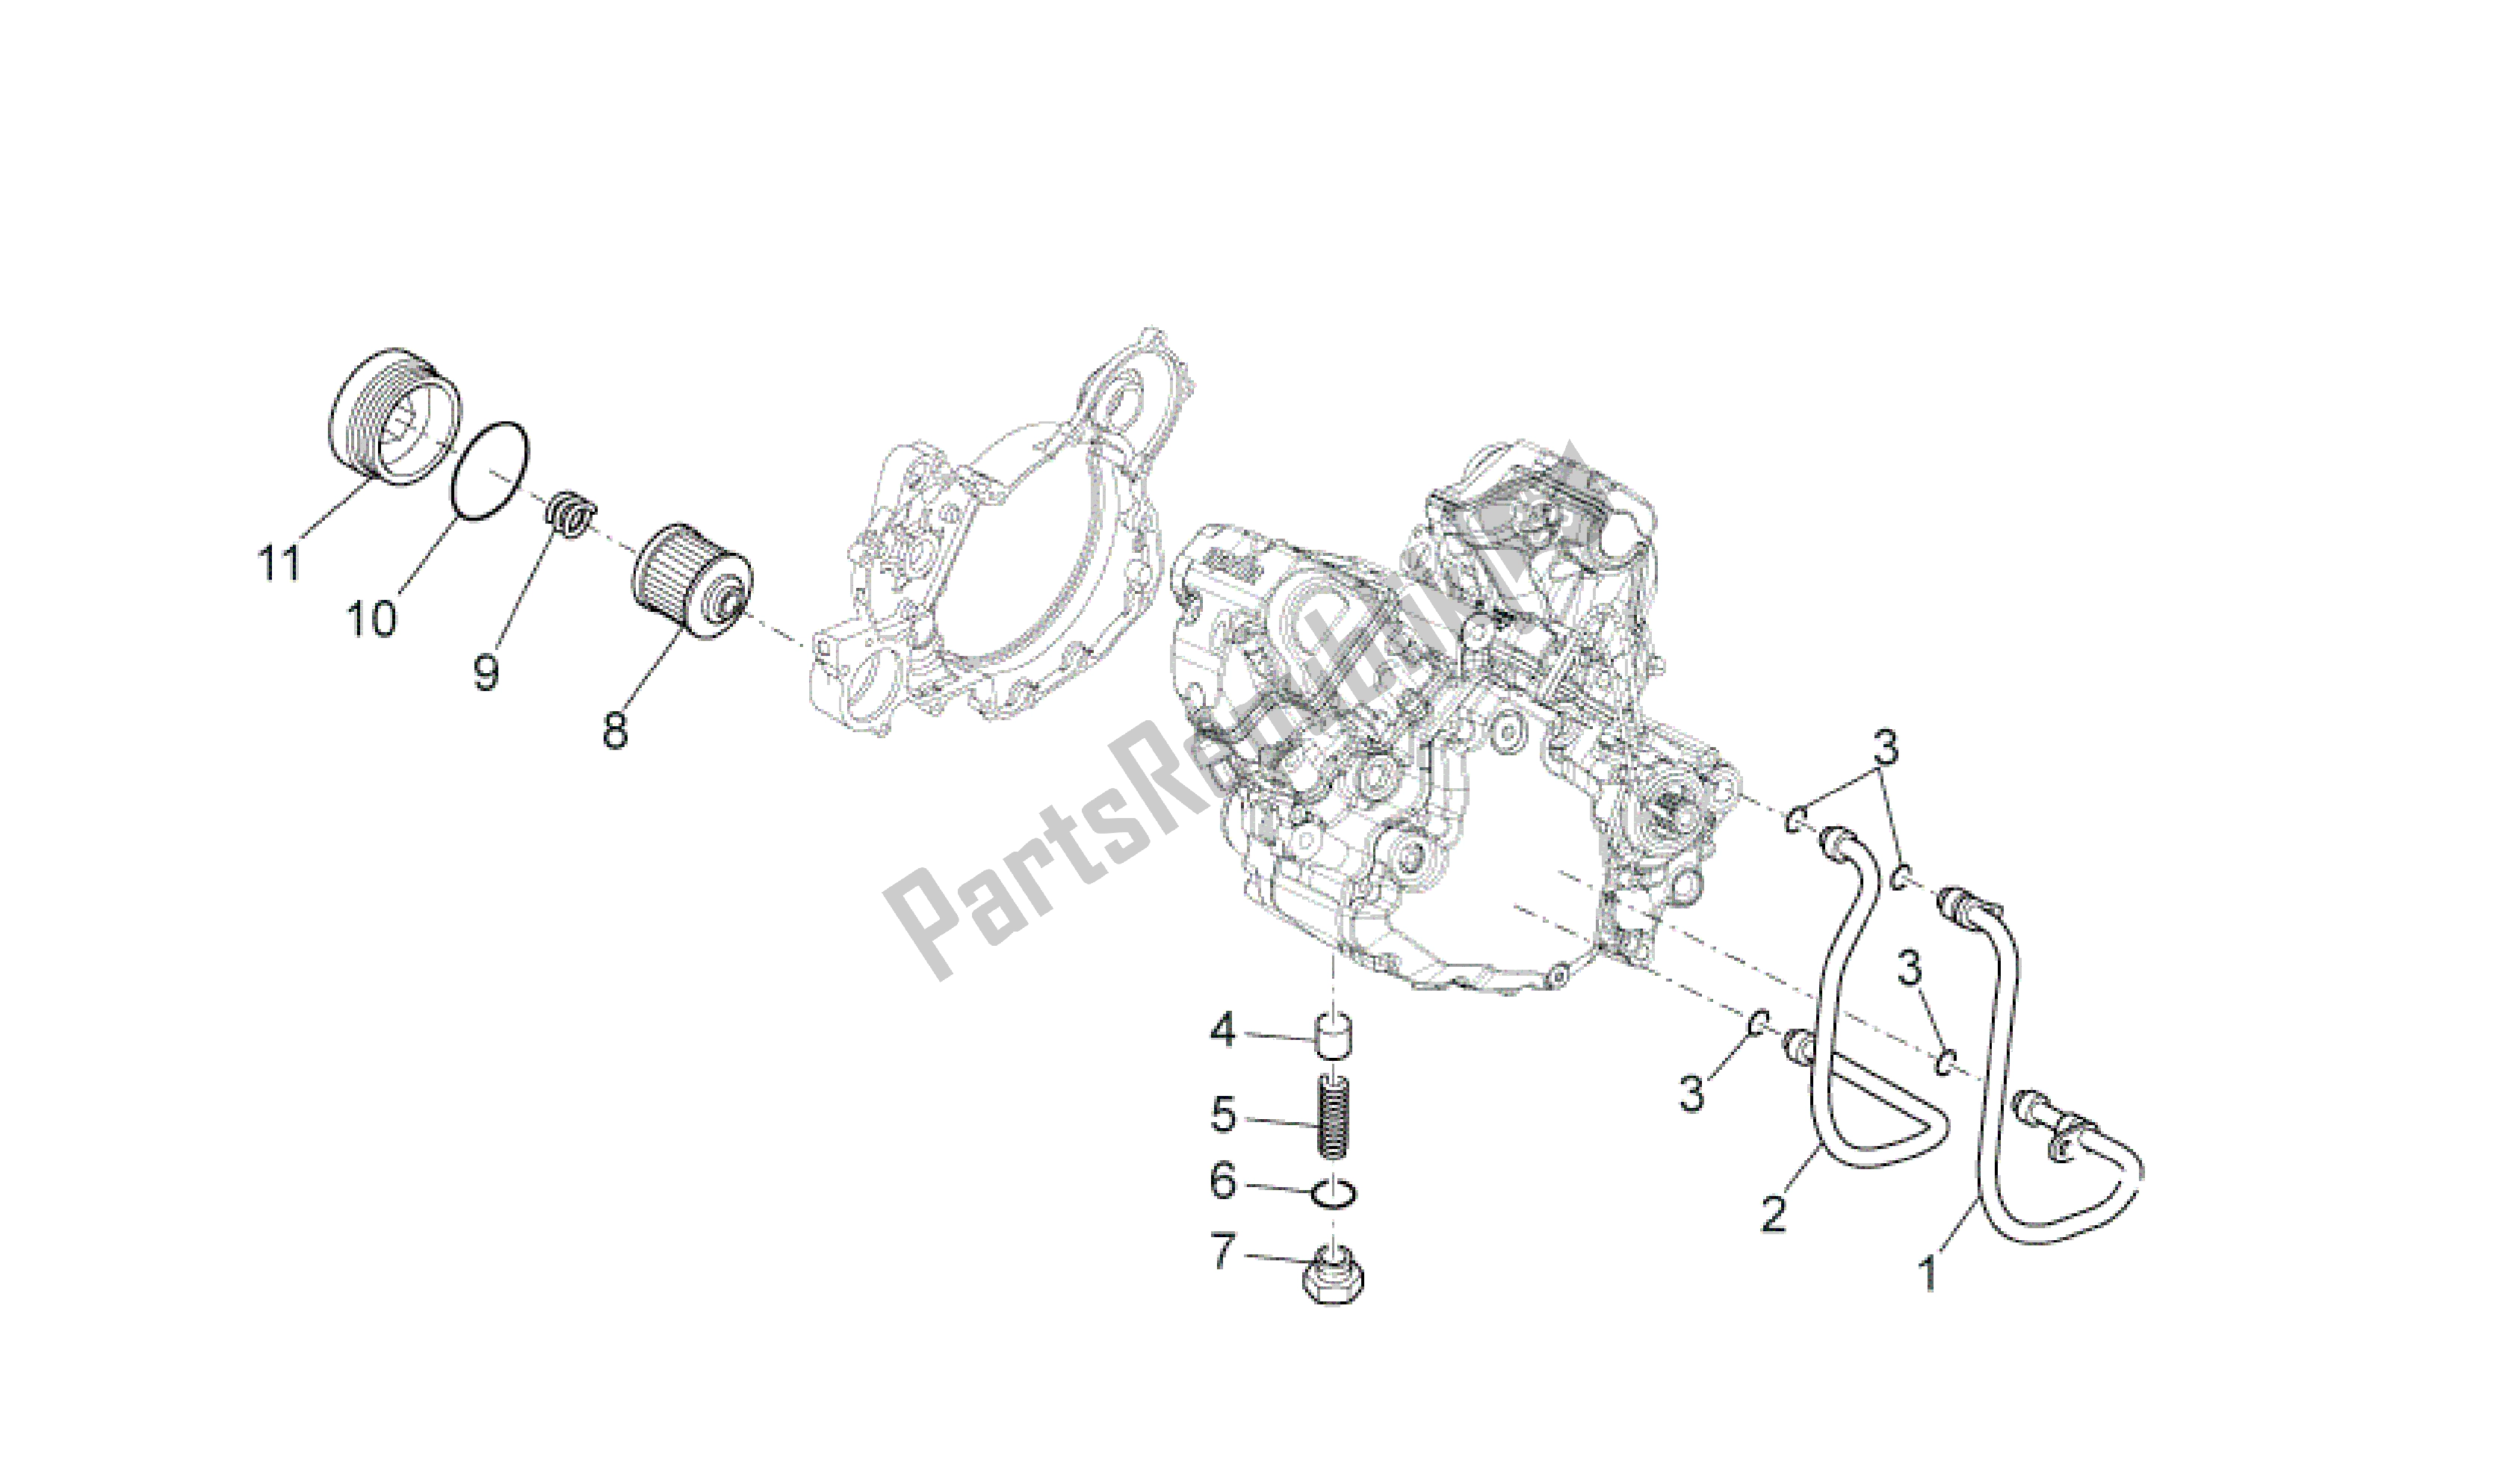 All parts for the Lubrication of the Aprilia MXV 450 2008 - 2010